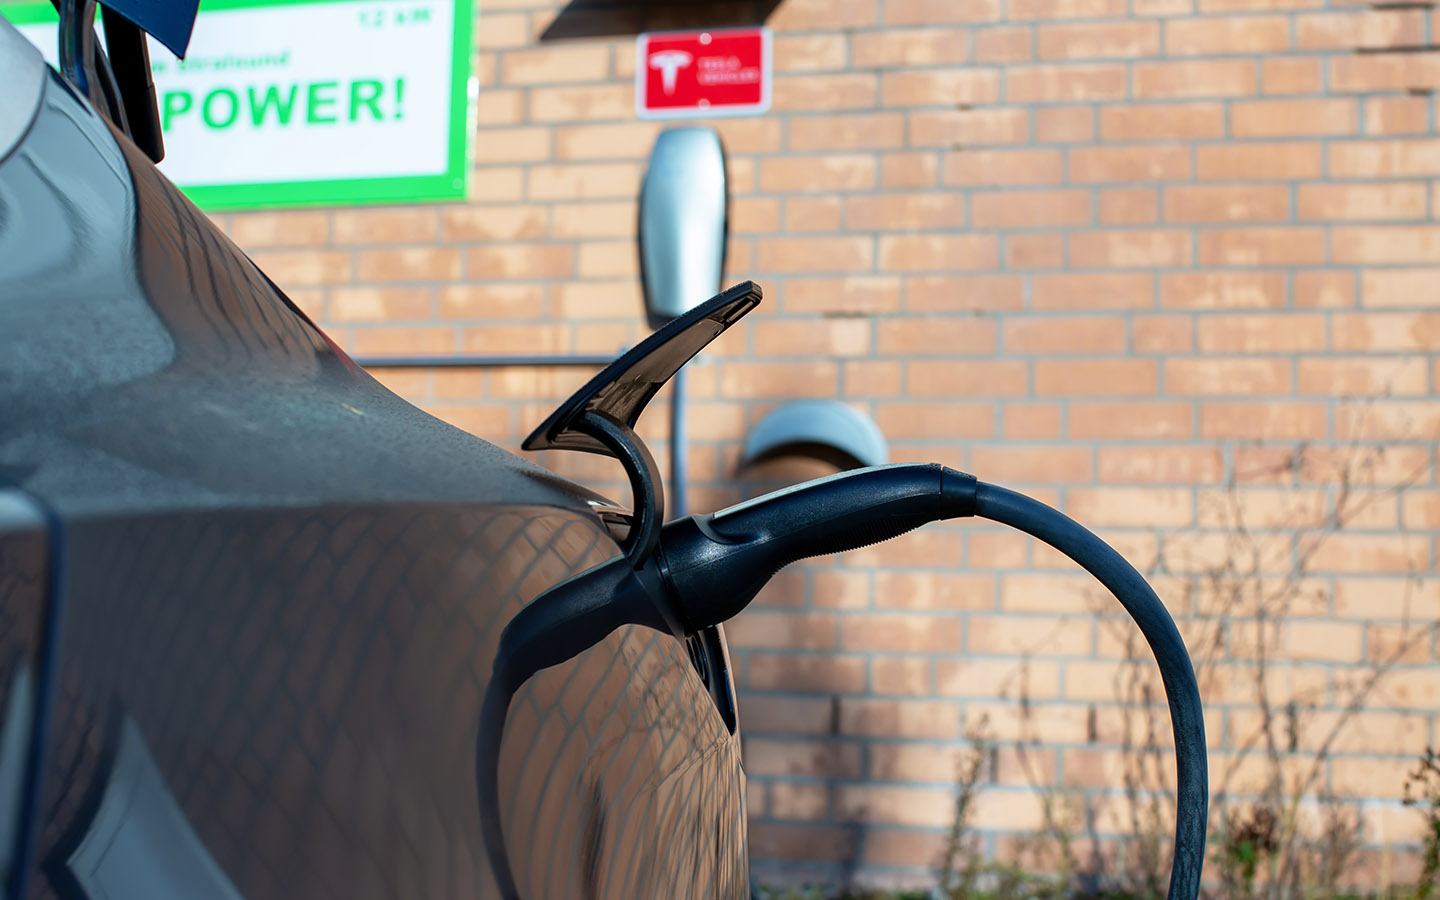 tesla owners can easily charge their tesla vehicles using the tesla destination chargers